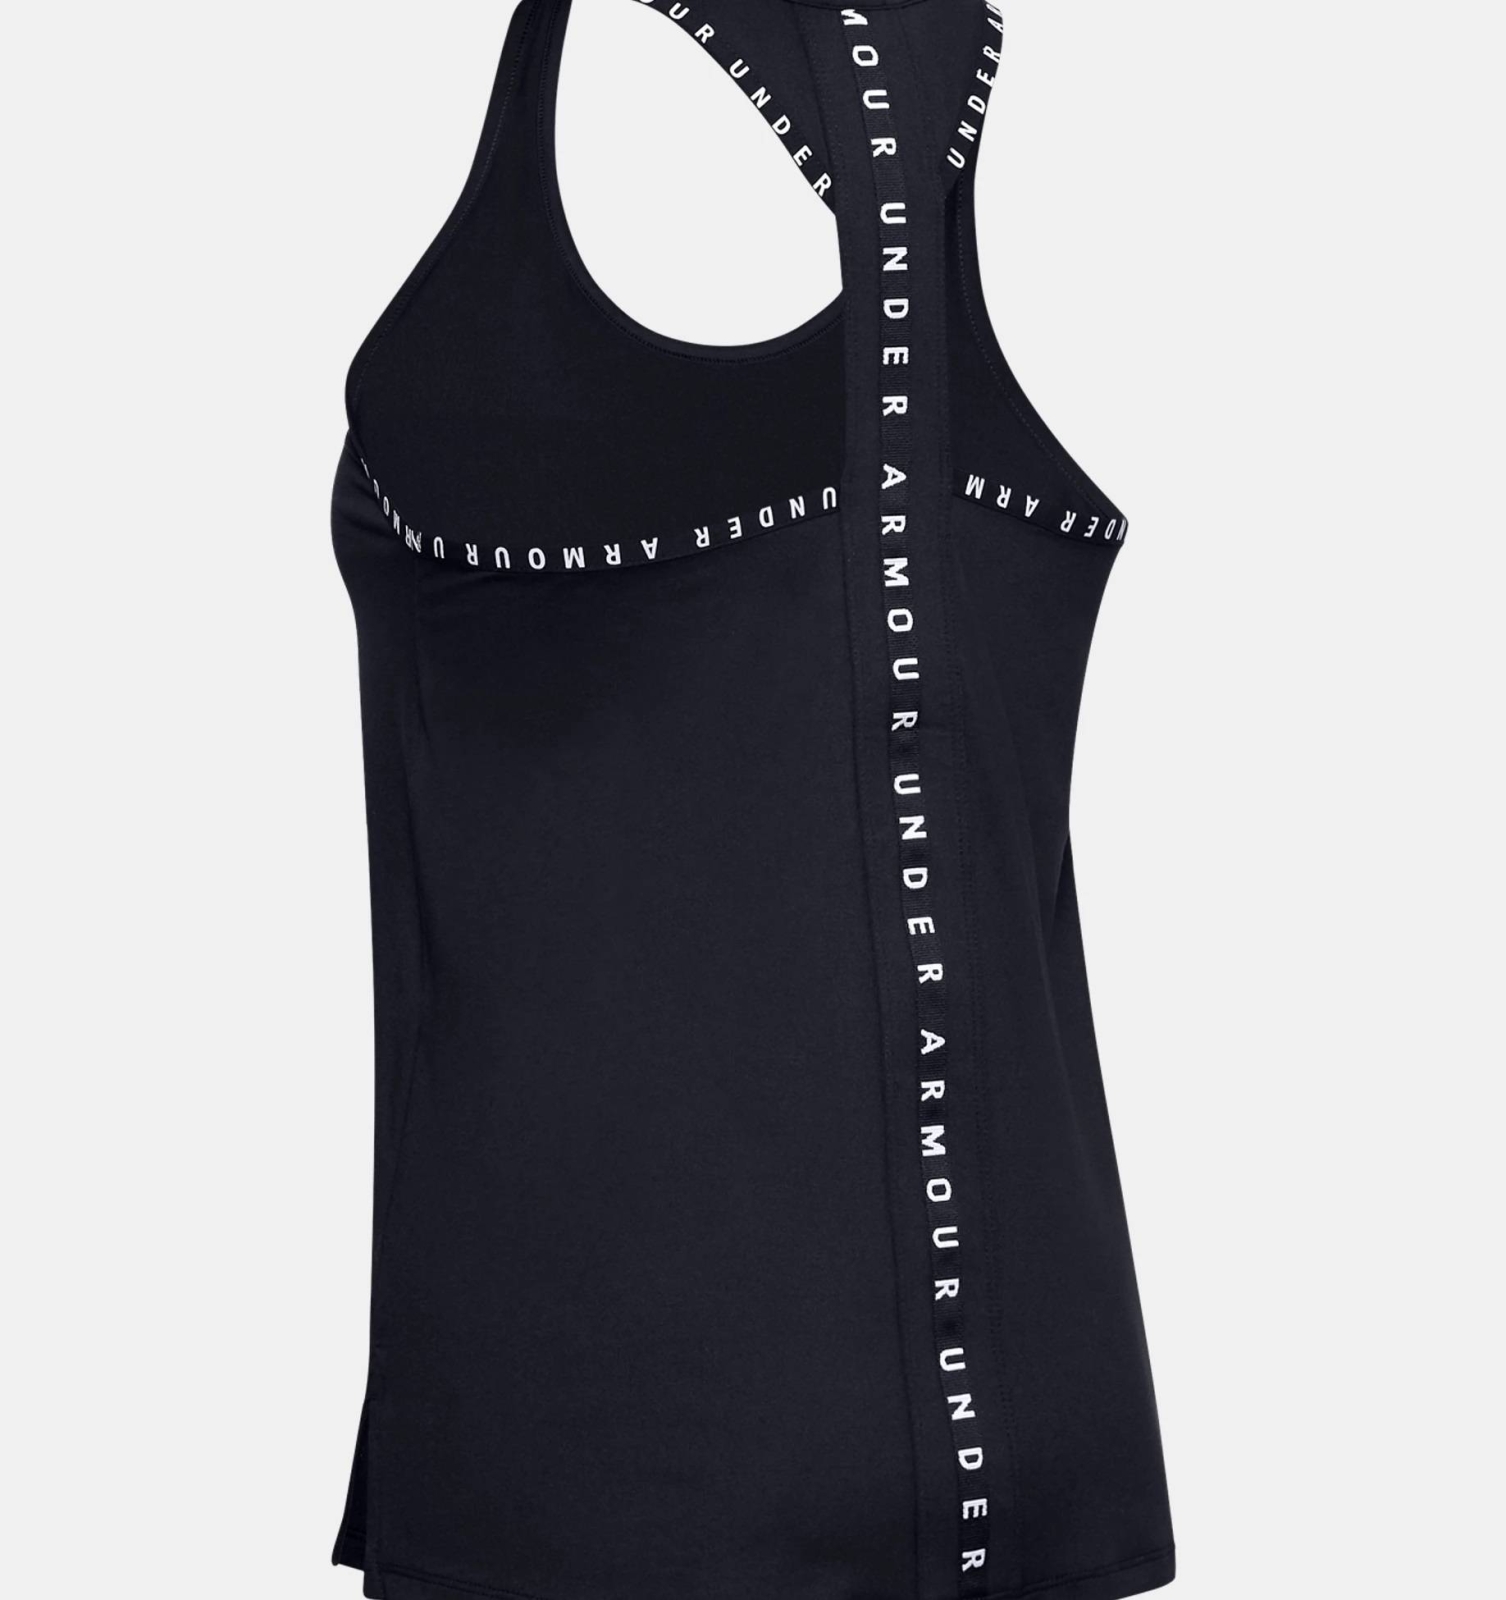 UNDER ARMOUR KNOCKOUT TANK